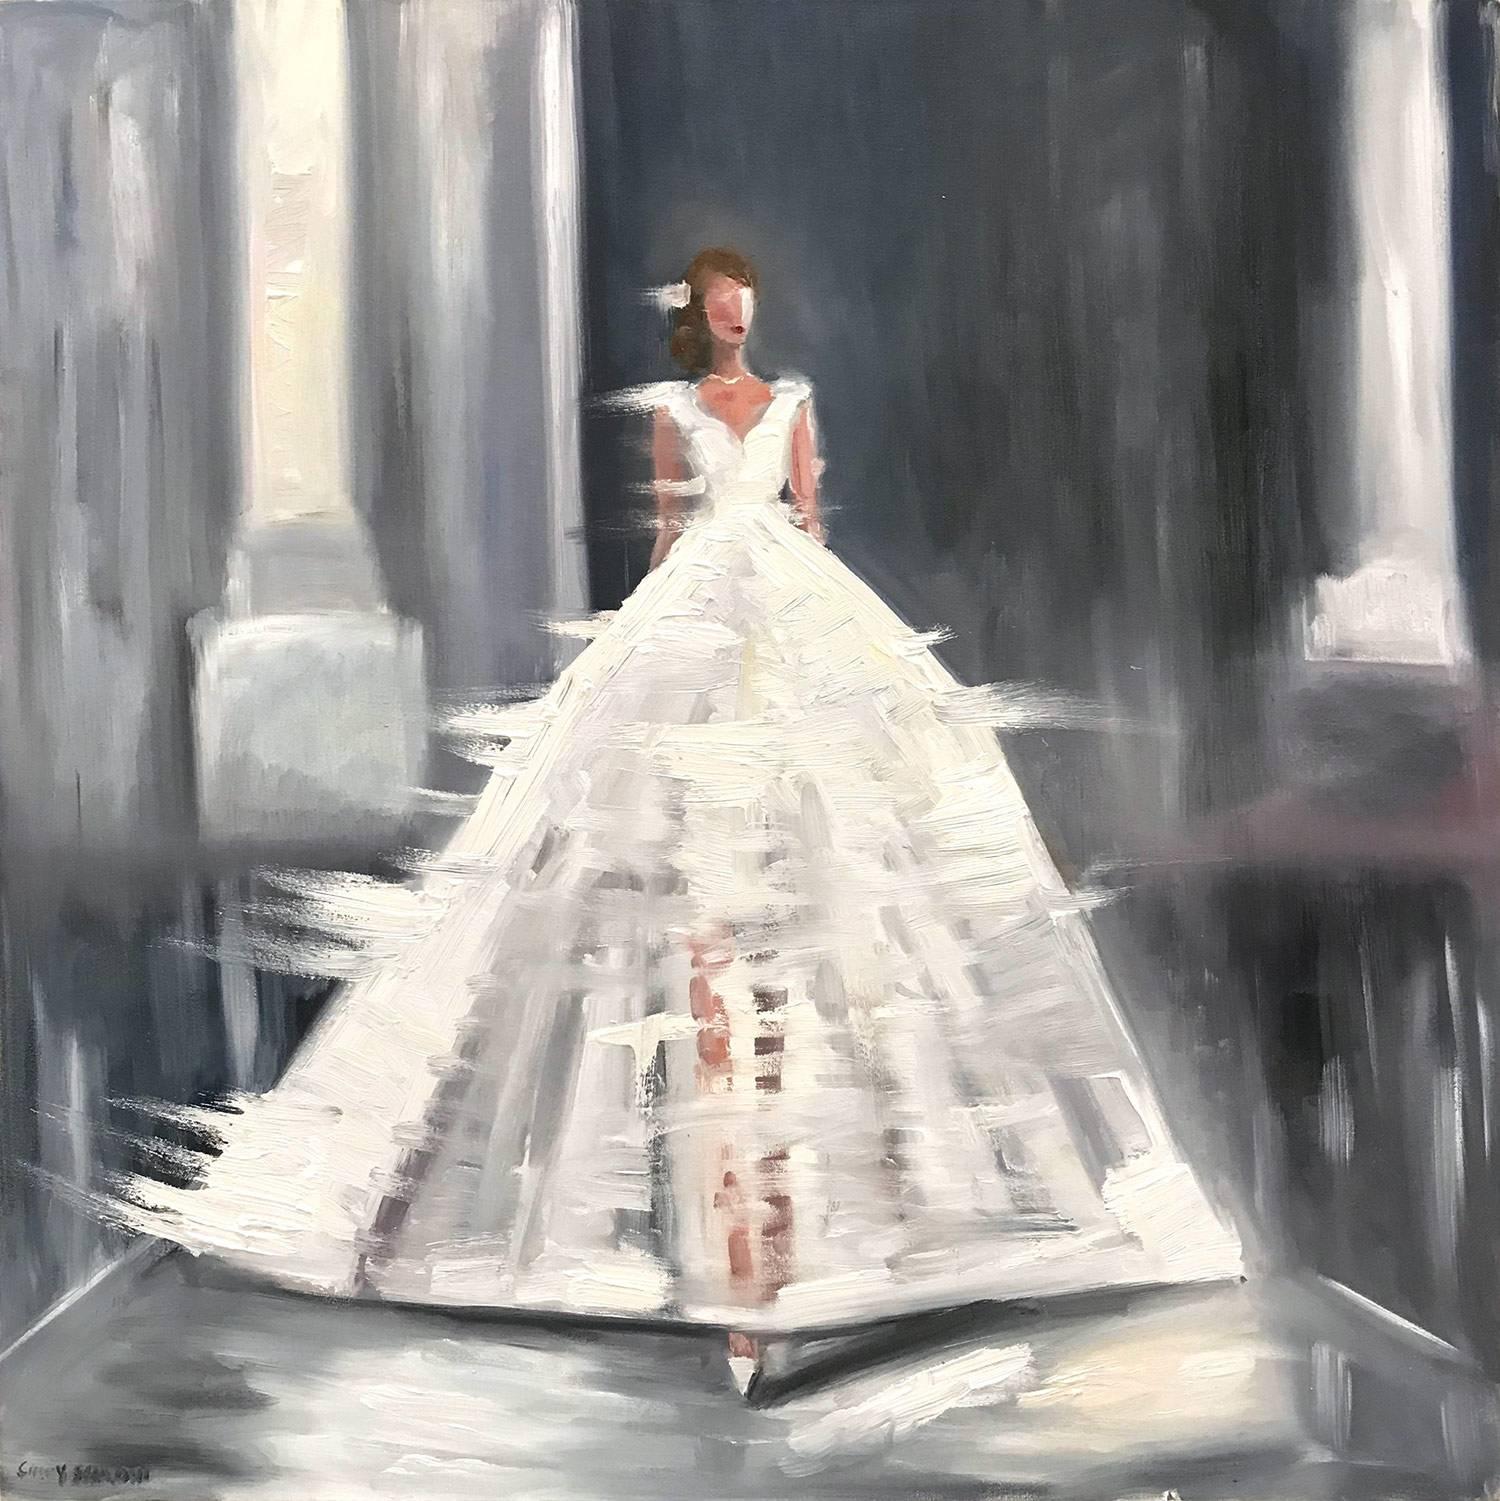 Cindy Shaoul Figurative Painting - "Stepping Out - Mykonos" Impressionistic Oil Painting of Woman in Haute Couture 